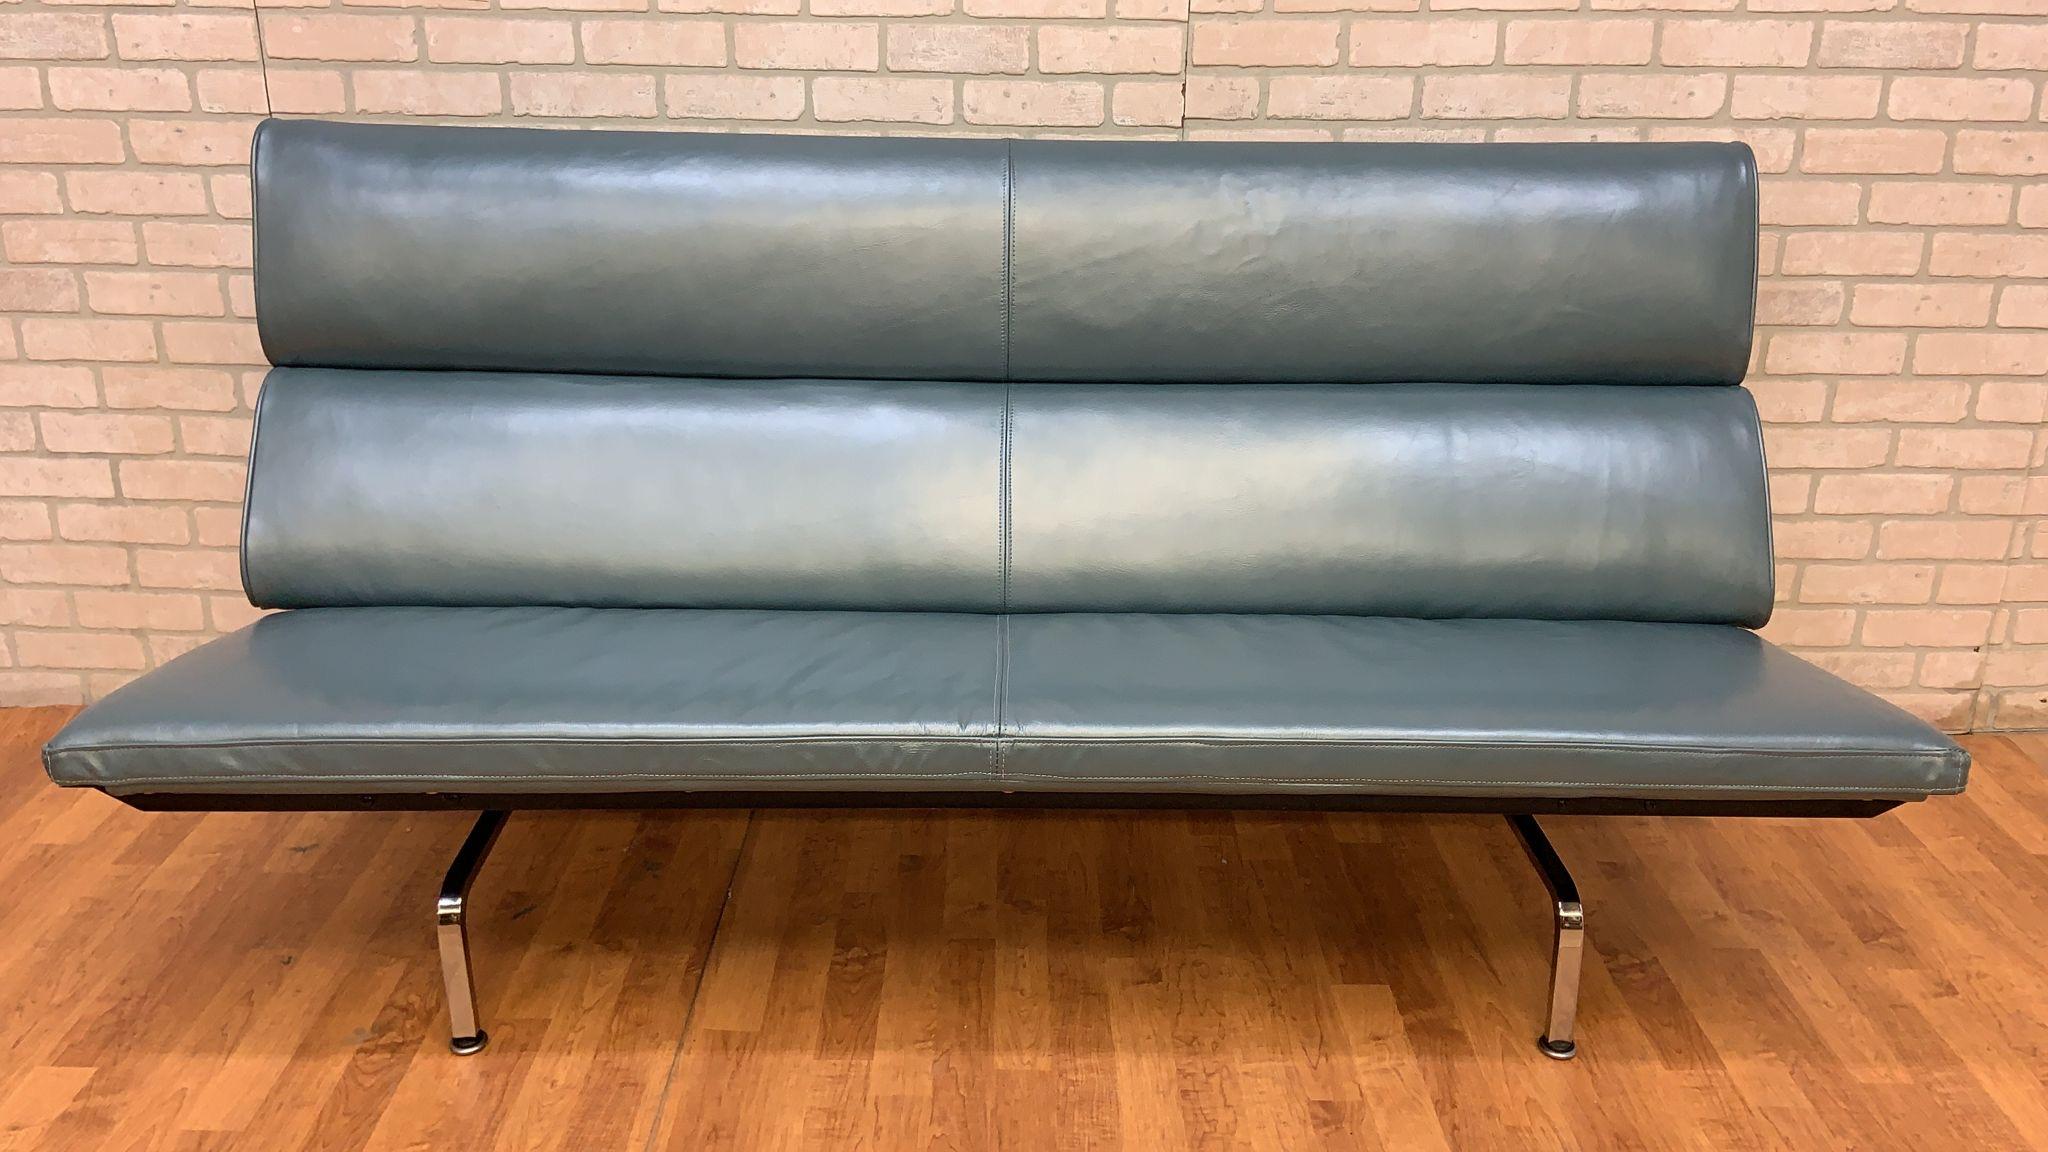 Vintage Compact Sofa Herman Miller Newly Upholstered in Holly Hunt Teal Metallic Leather

Vintage classic & iconic Herman Miller beautifully designed Compact Sofa. This solid, clean line high back metal framed sofa is wide, stylish and comfortable.